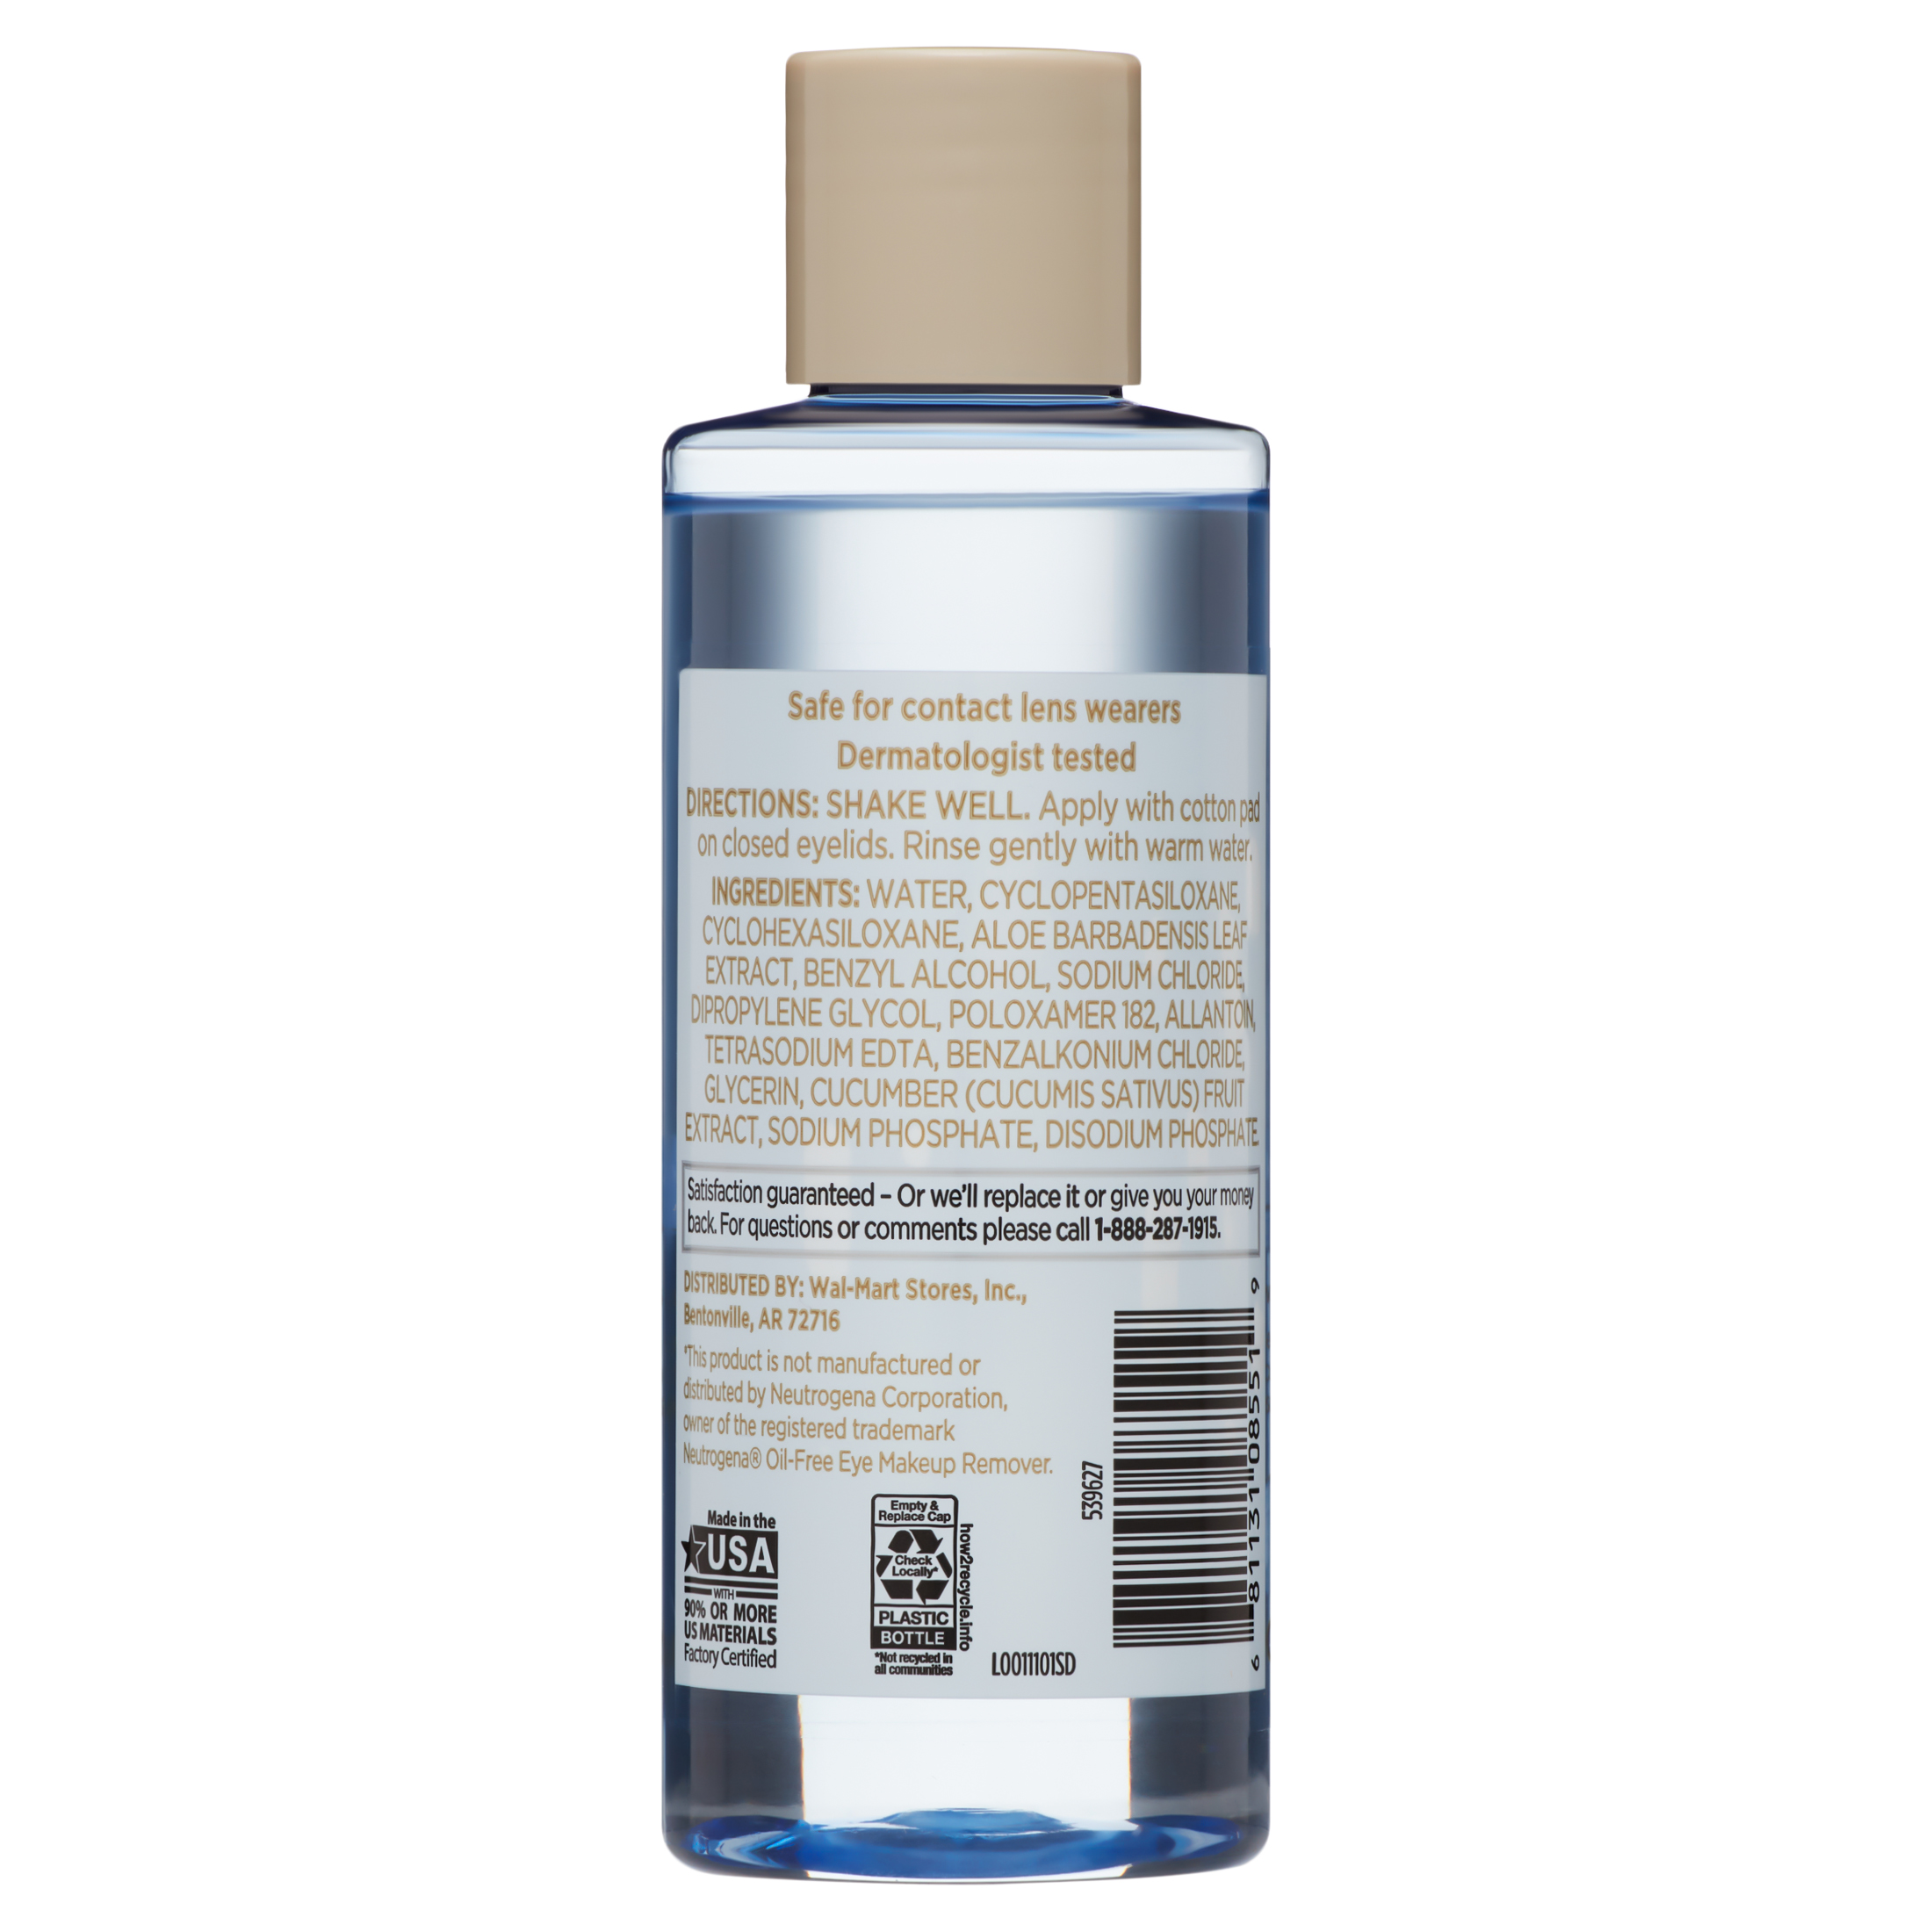 Equate Beauty Oil-Free Eye Makeup Remover, 5.5 Fl oz - image 5 of 7